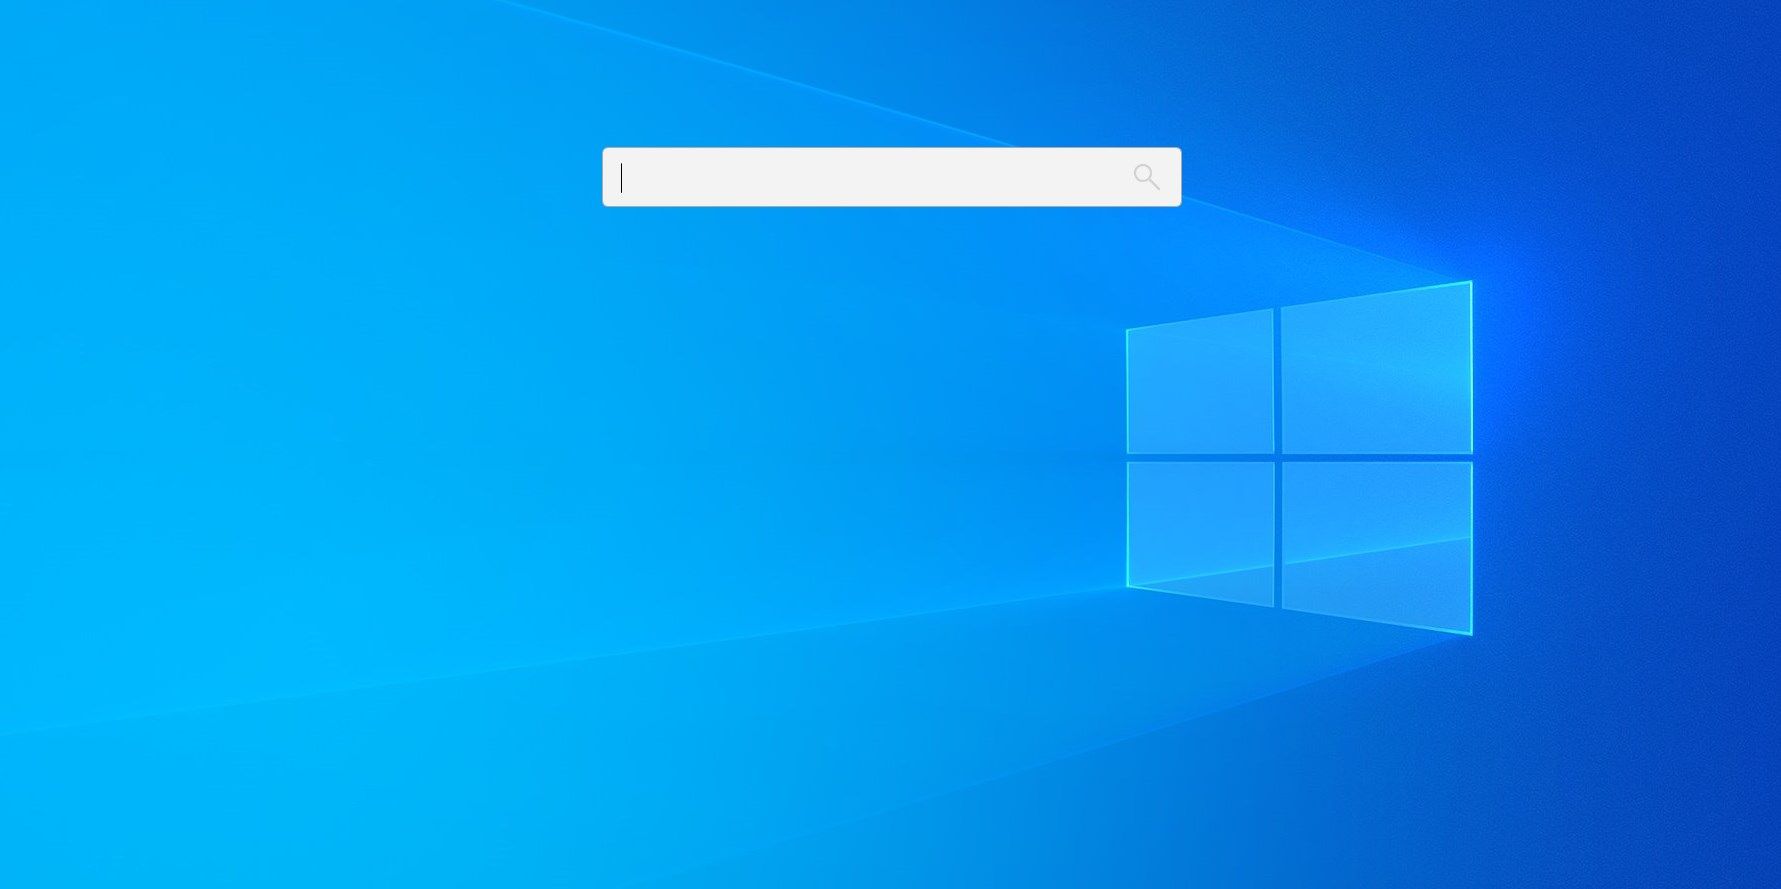 Press Alt + Space, your Spotlight will be visible on the center Windows desktop